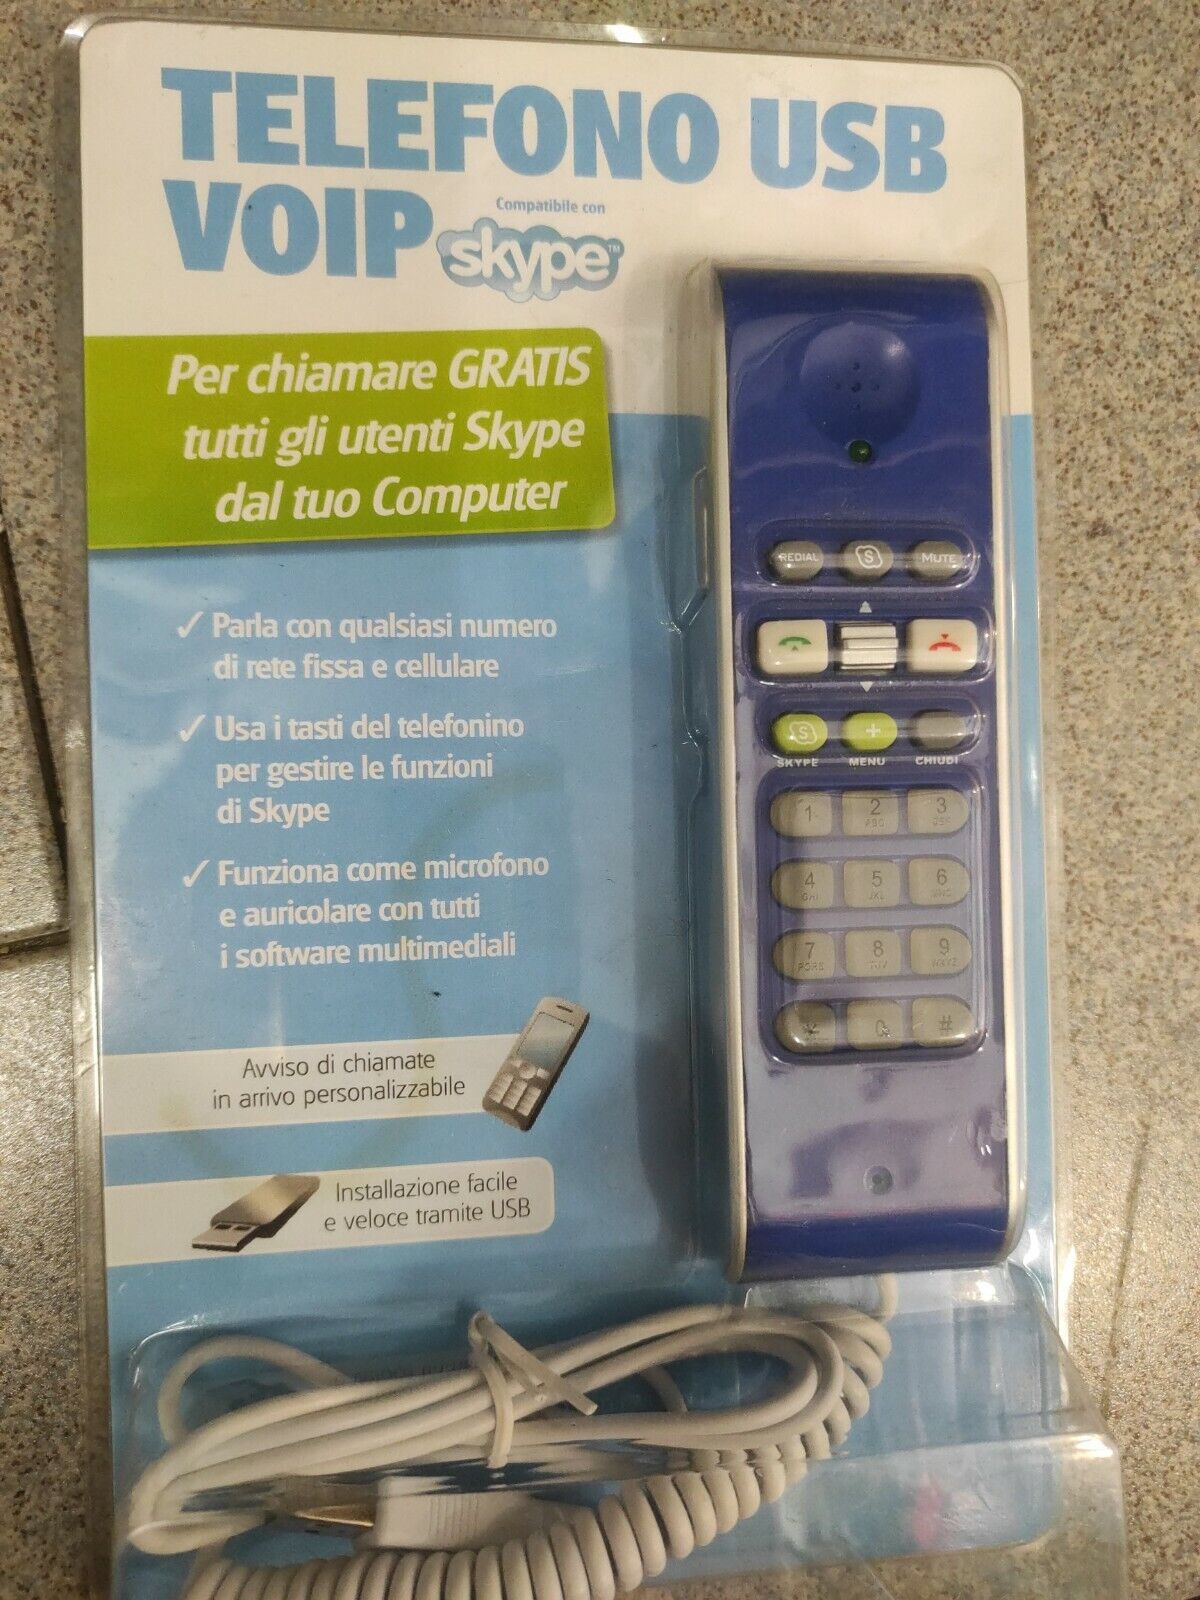 USB VoIP Special Campaign Phone WinXP Sales for sale Win Vista NEW directory